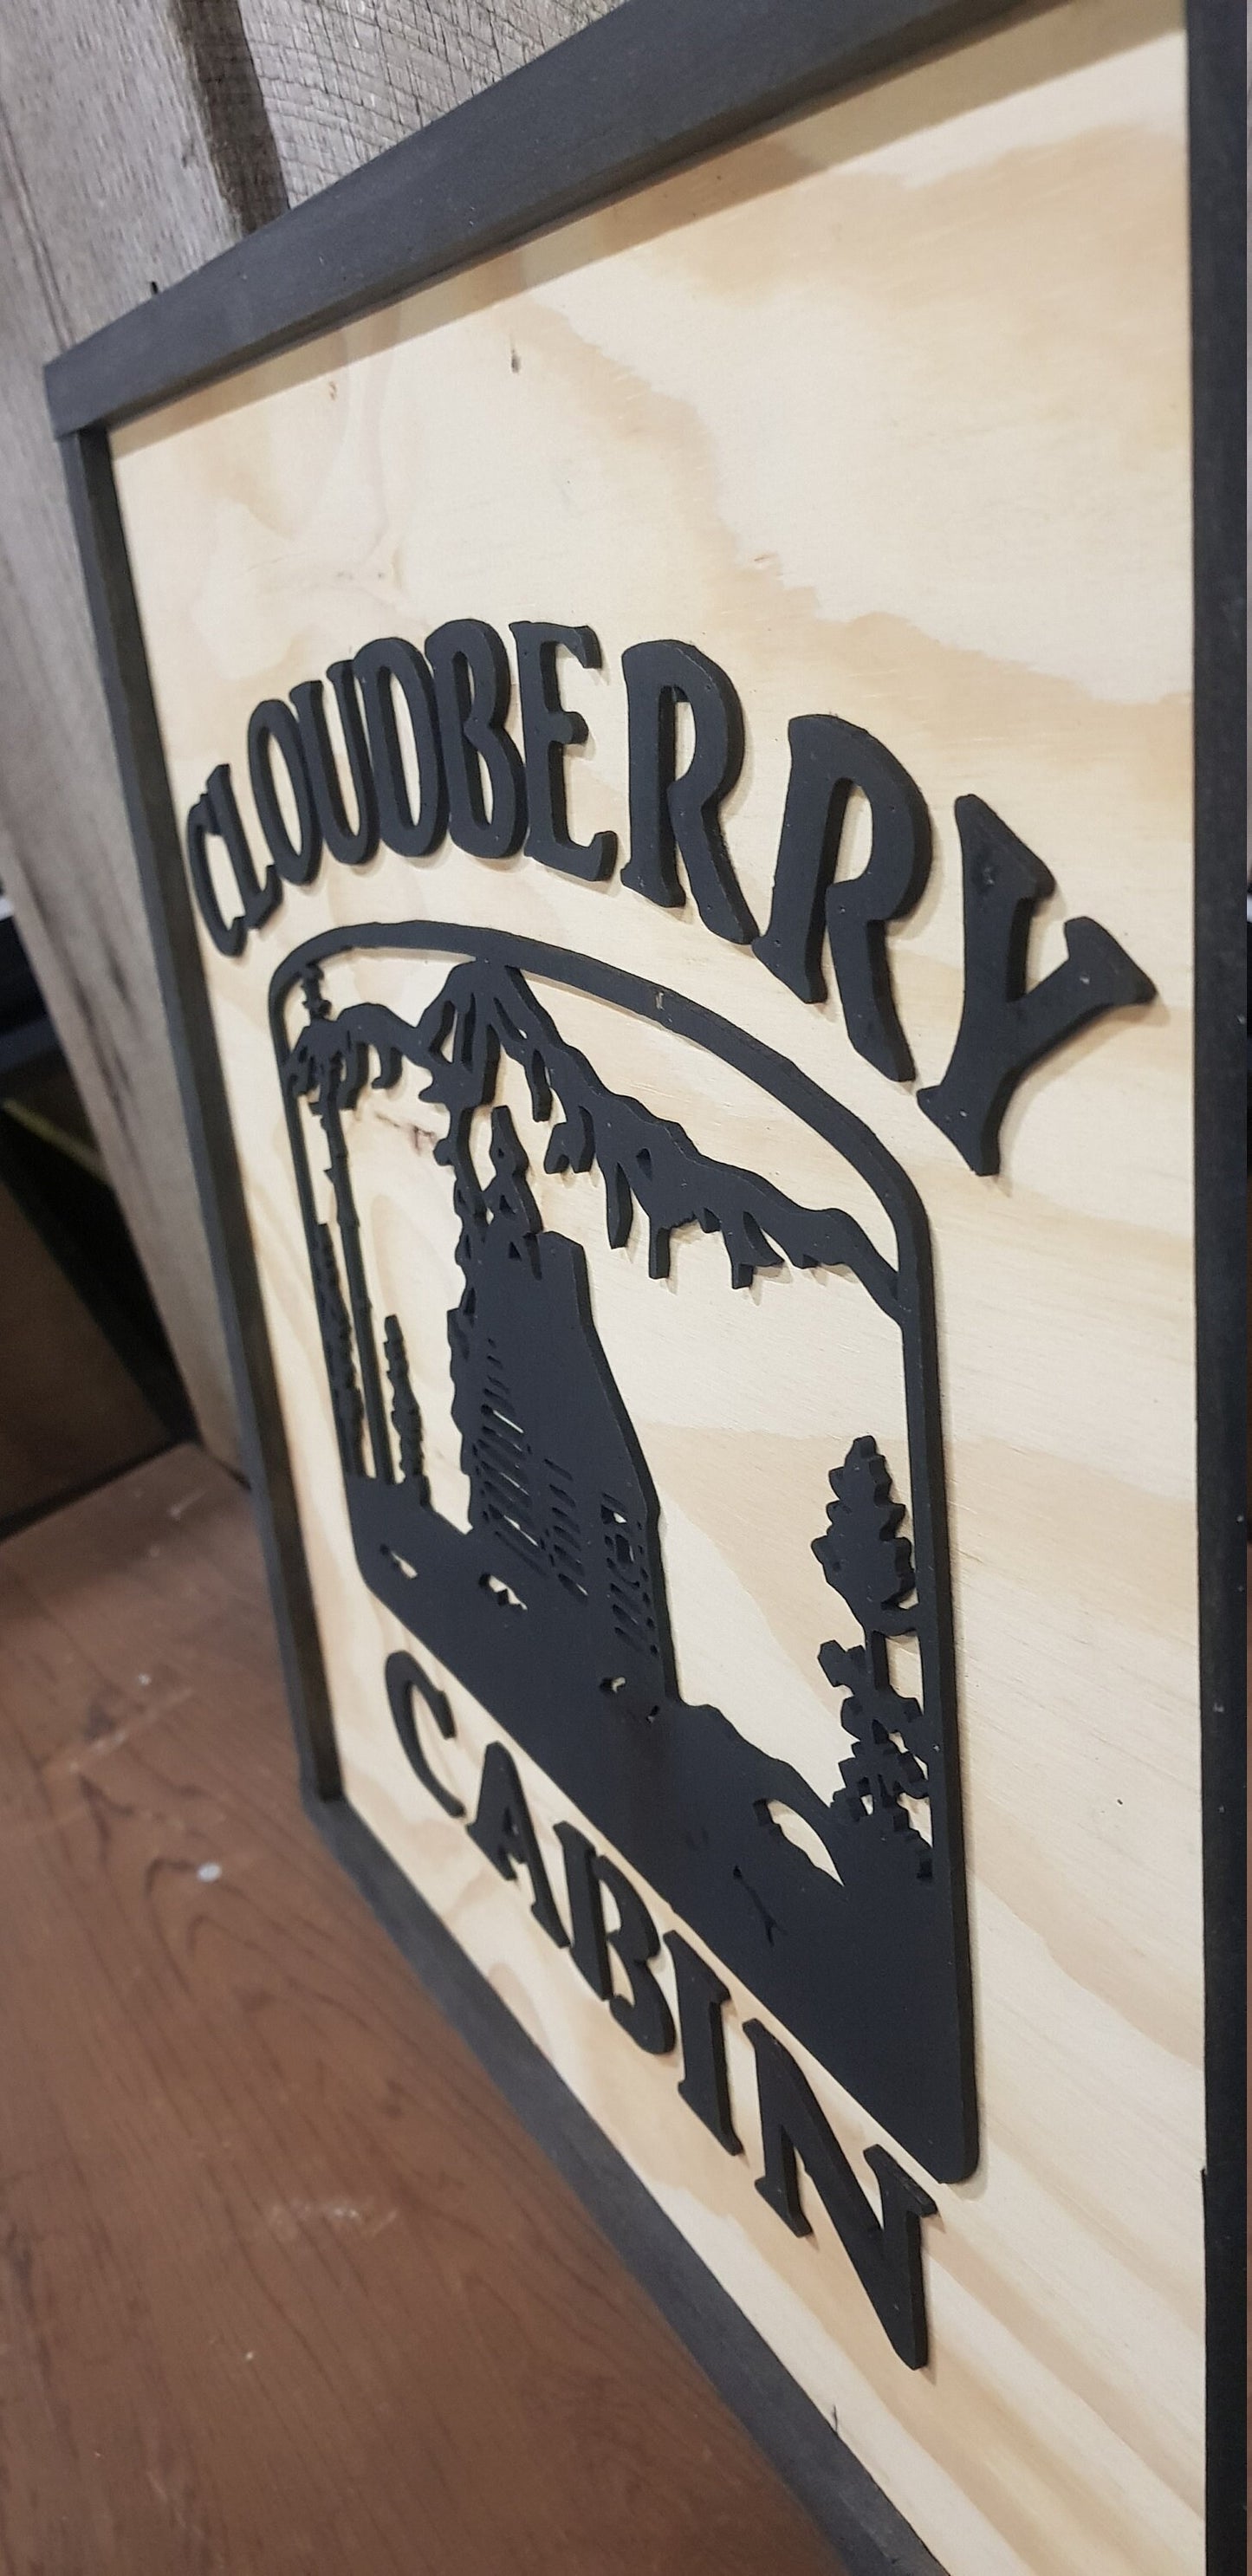 Large Custom Cabin Ranch Sign, Square, Over-sized Rustic Business Logo, Wood, Laser Cut Out, 3D, Extra Large, Sign Footstepsinthepast